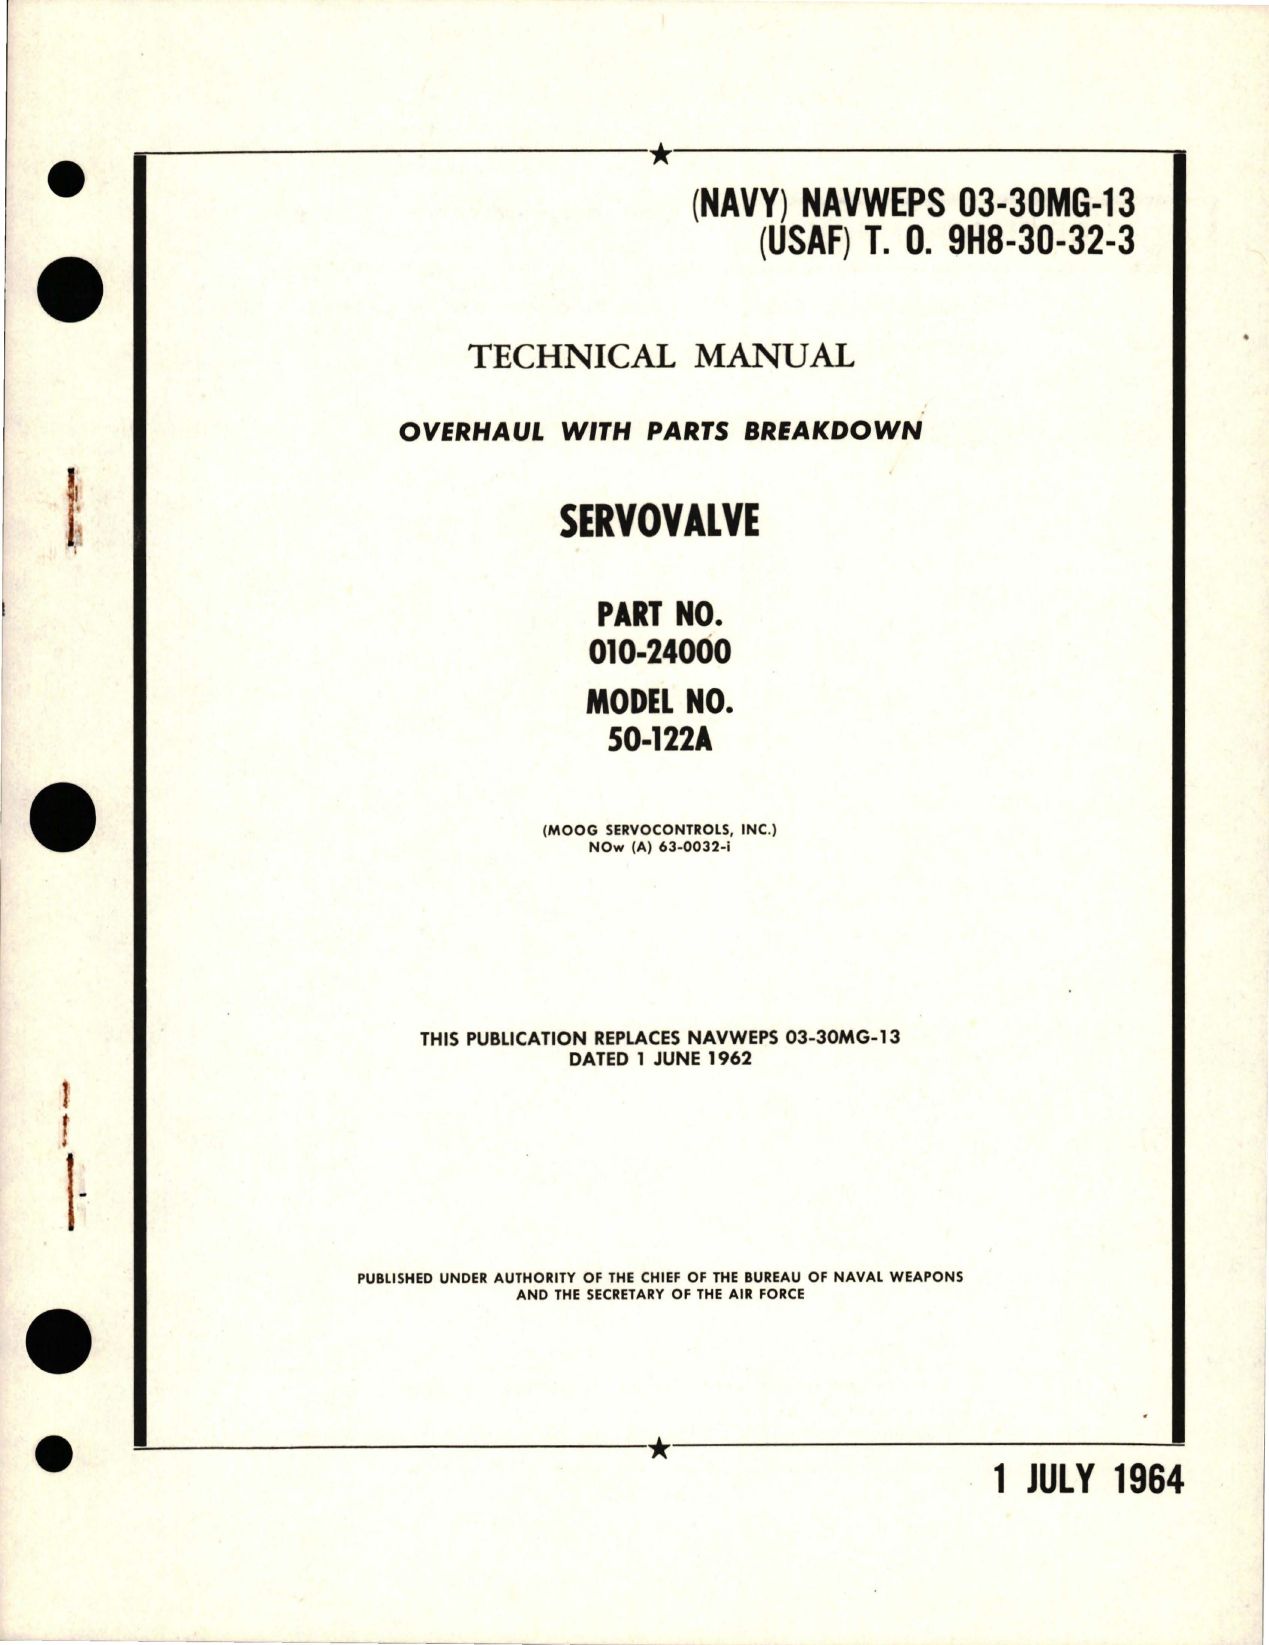 Sample page 1 from AirCorps Library document: Overhaul with Parts Breakdown for Servovalve - Part 010-24000 - Model 50-122A